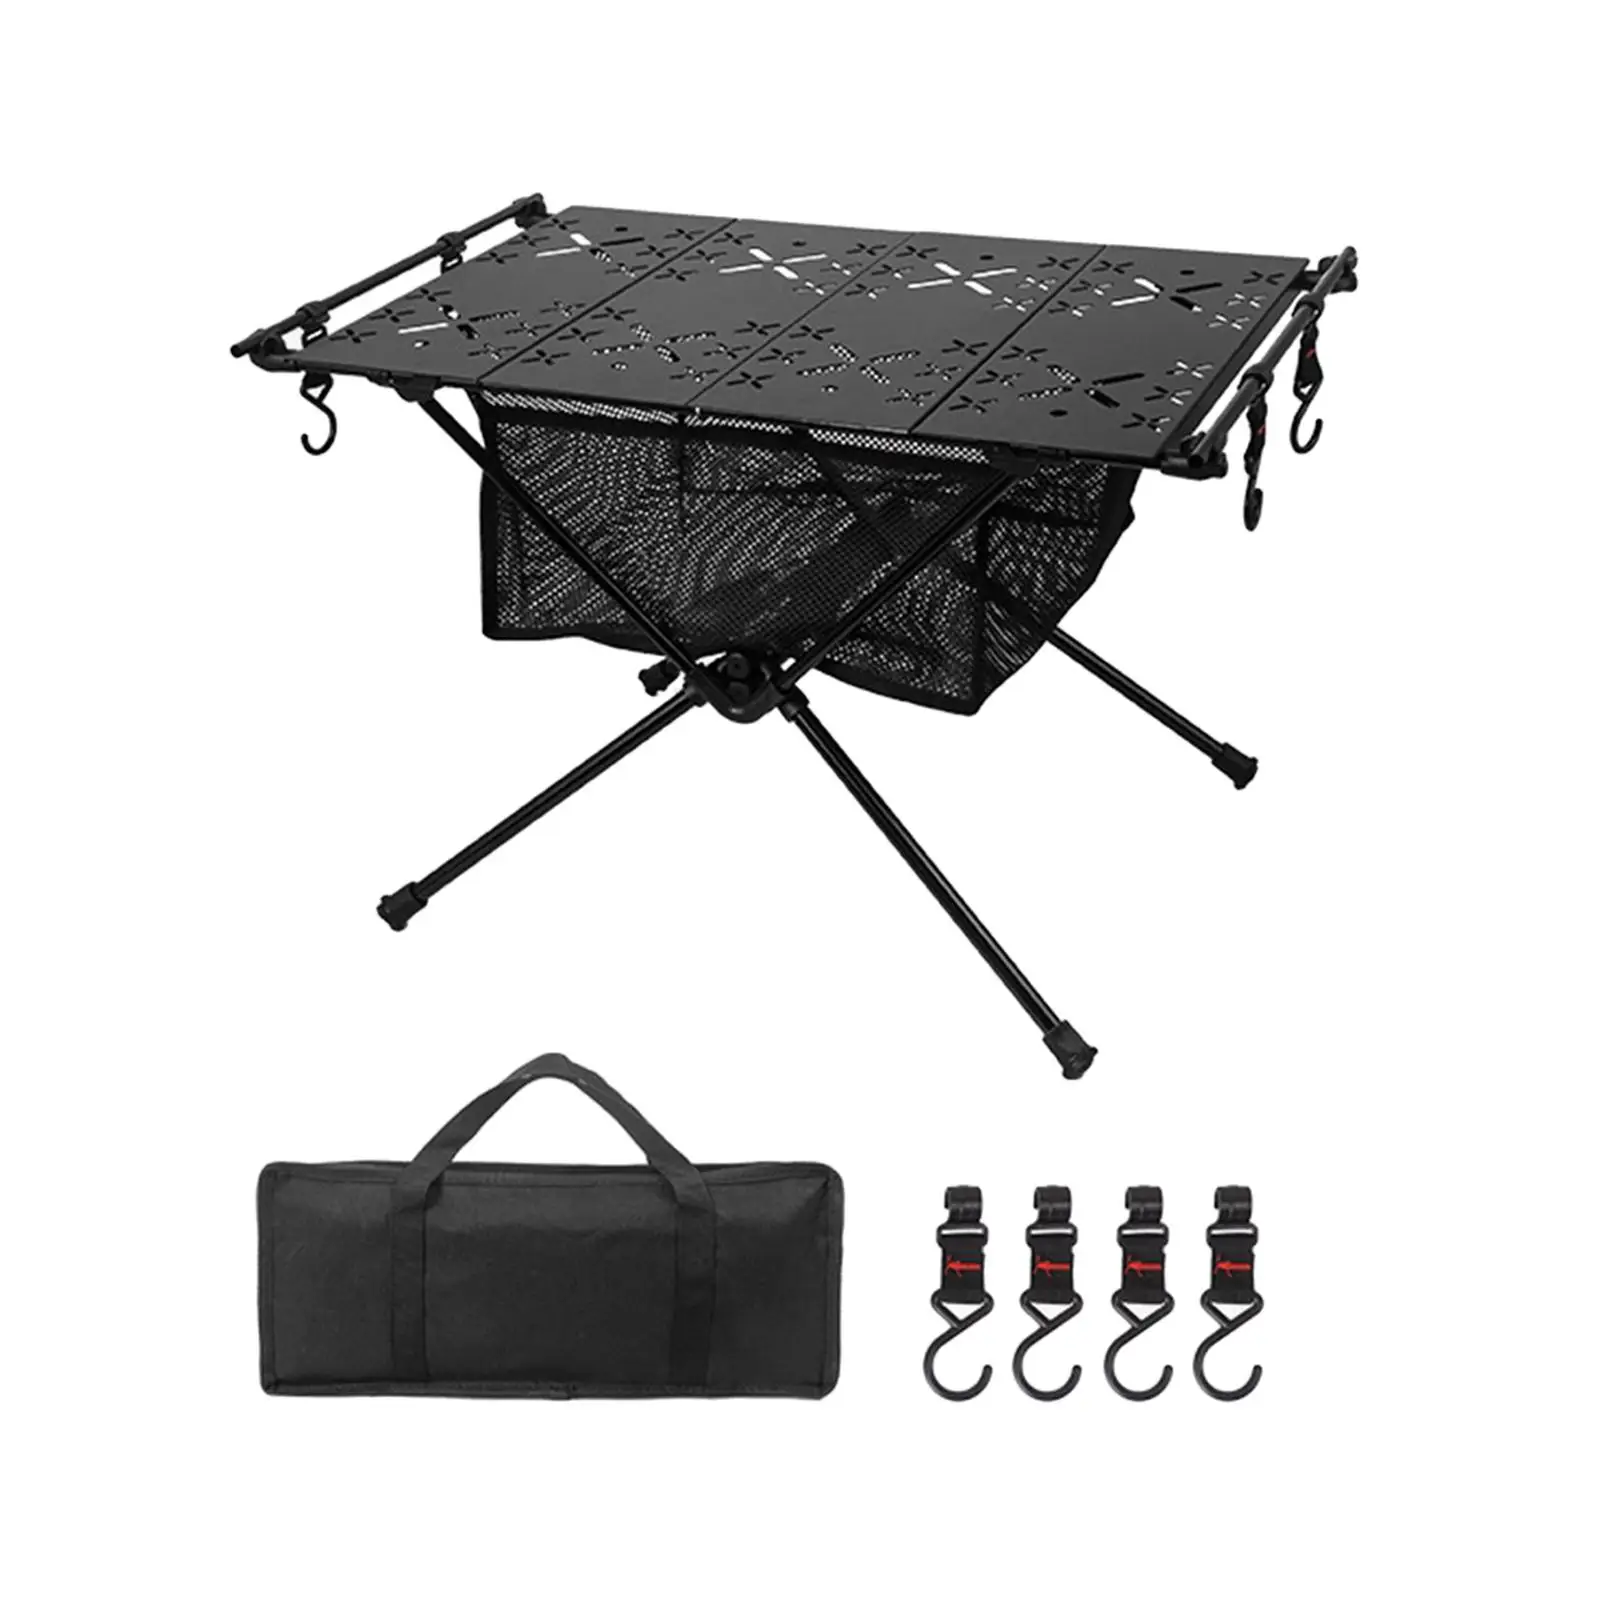 Foldable Camping Table with Storage Bag Aluminum Alloy Camp Table Portable Desk for Travel Backyard Backpacking Picnic Hiking